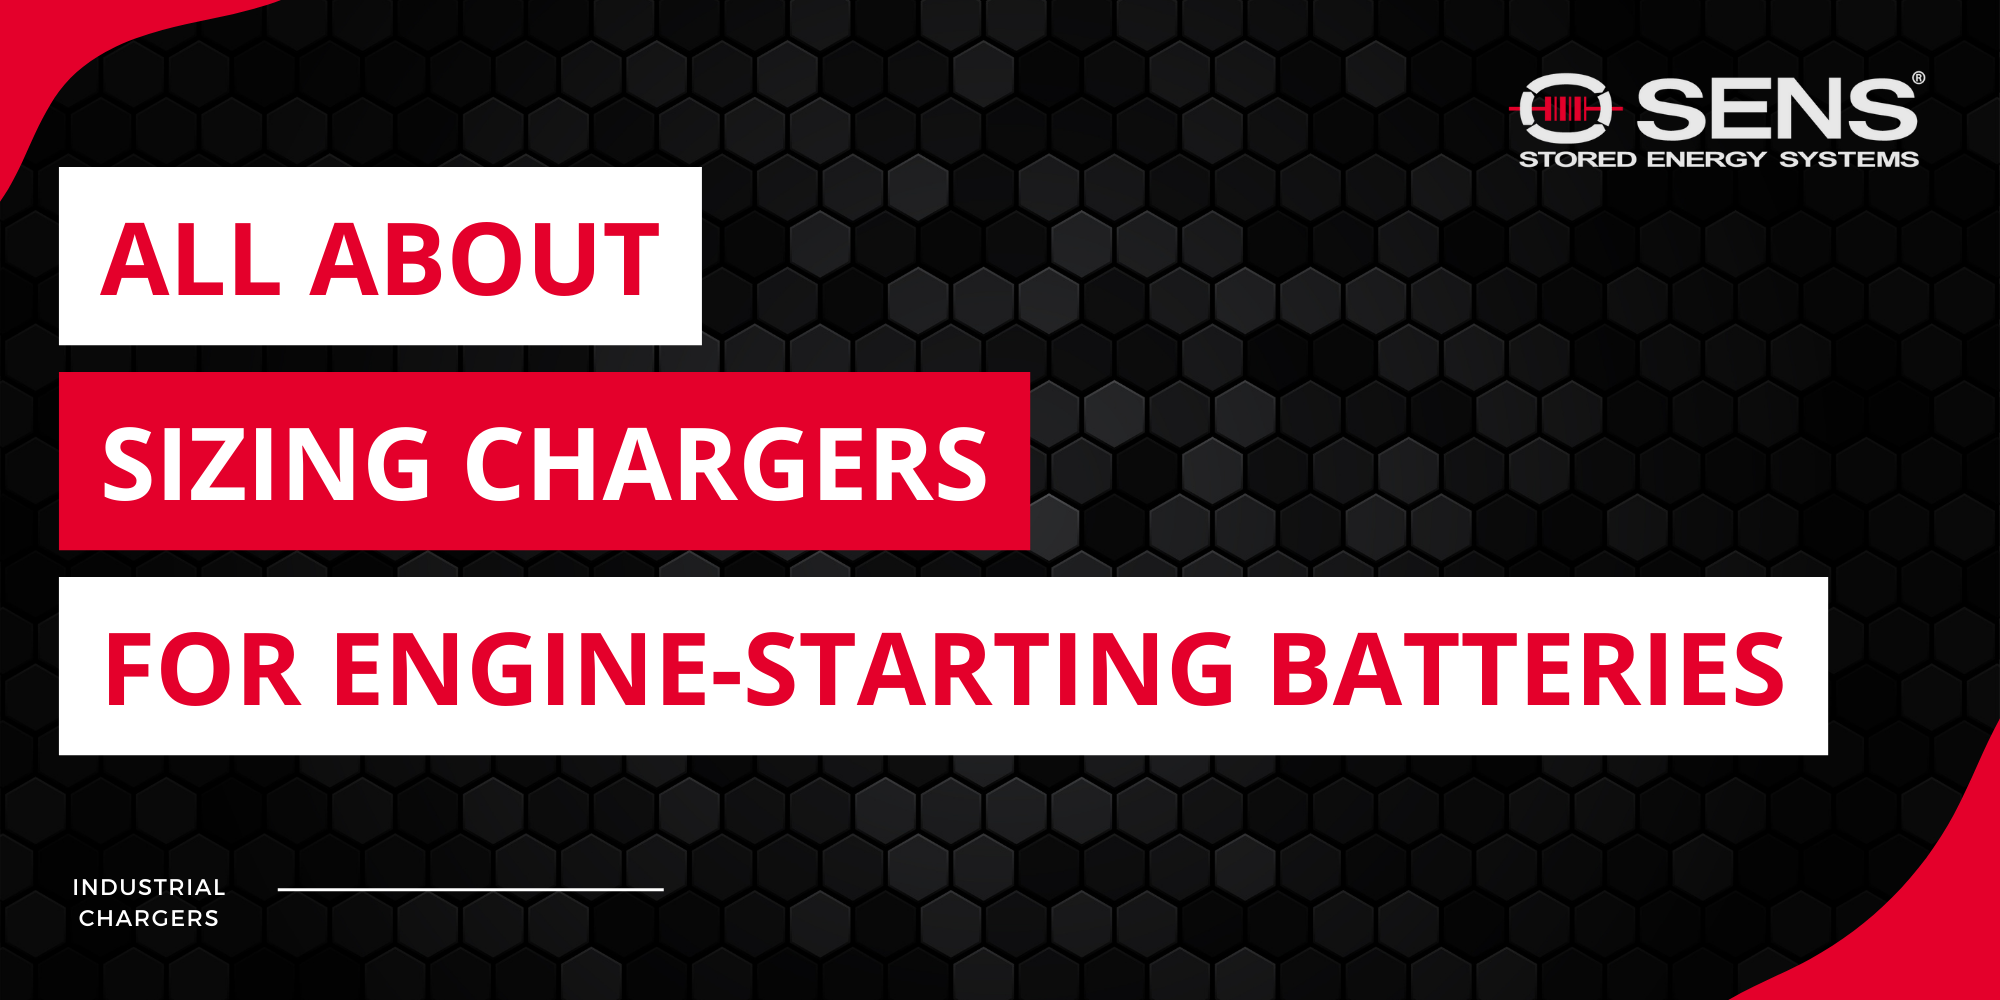 All About Sizing Chargers for Engine-Starting Batteries Featured Image